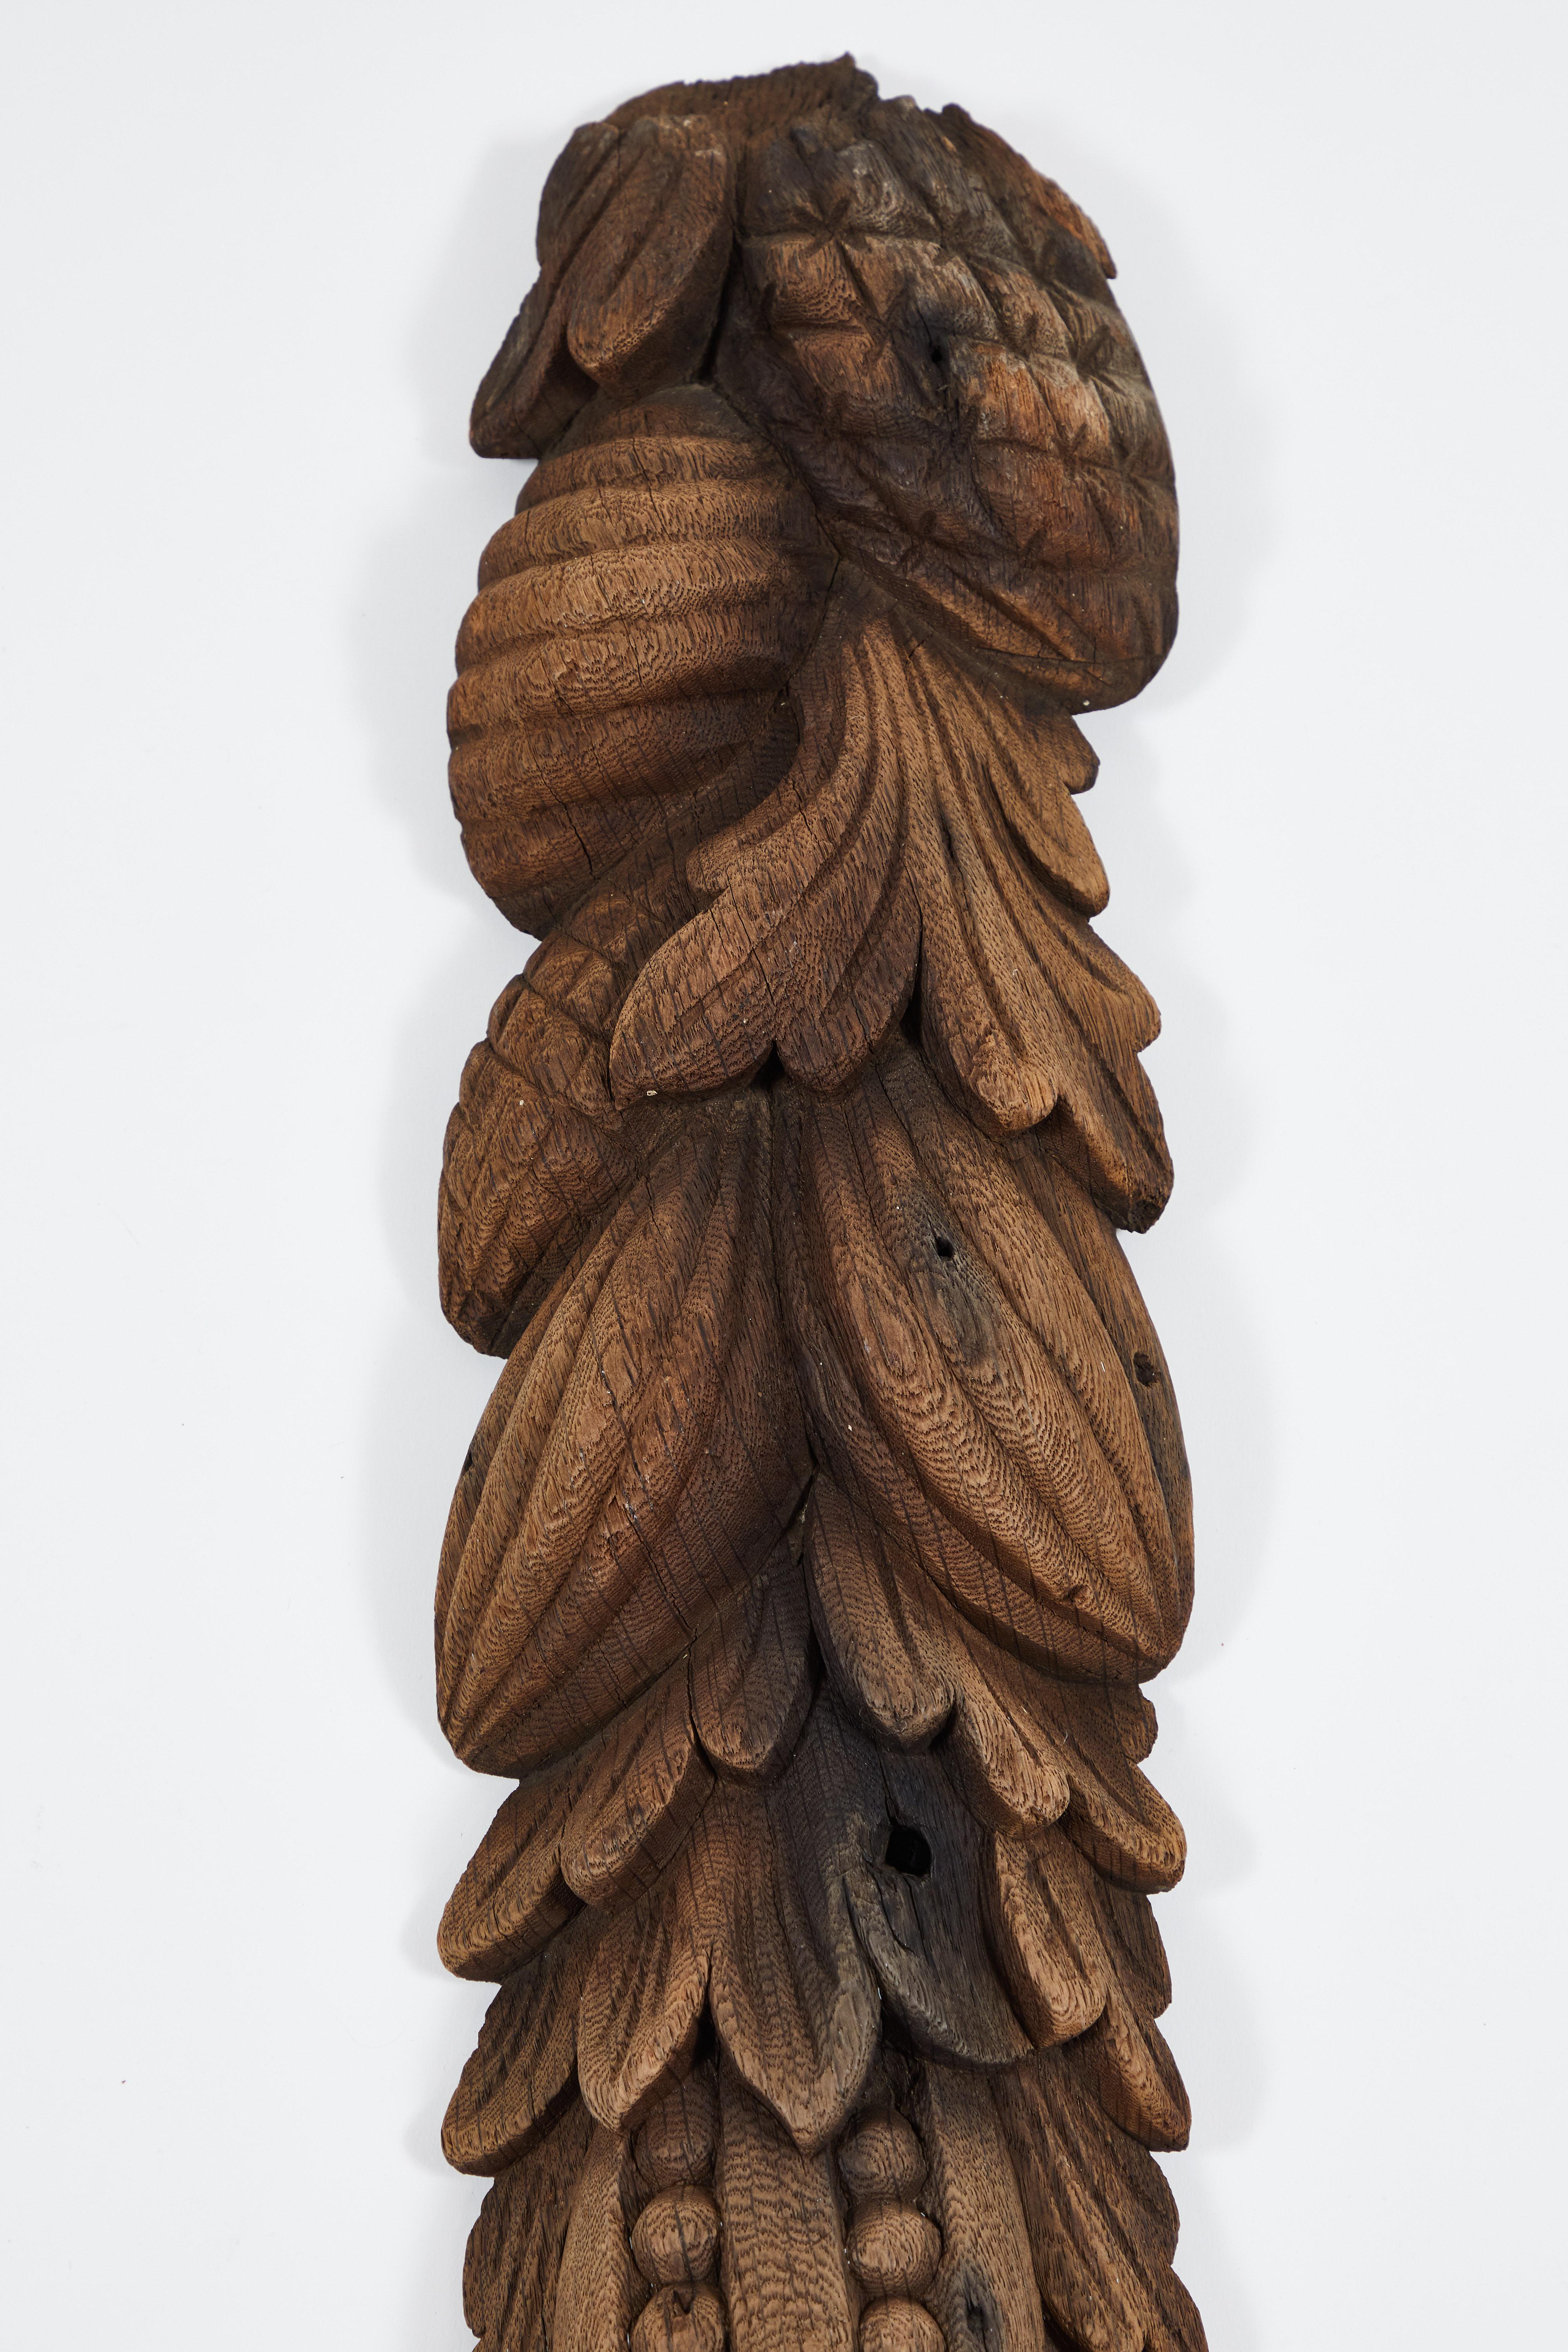 19th Century Late 1800s Hand Carved Wooden Architectural Element with Fruit and Leaves